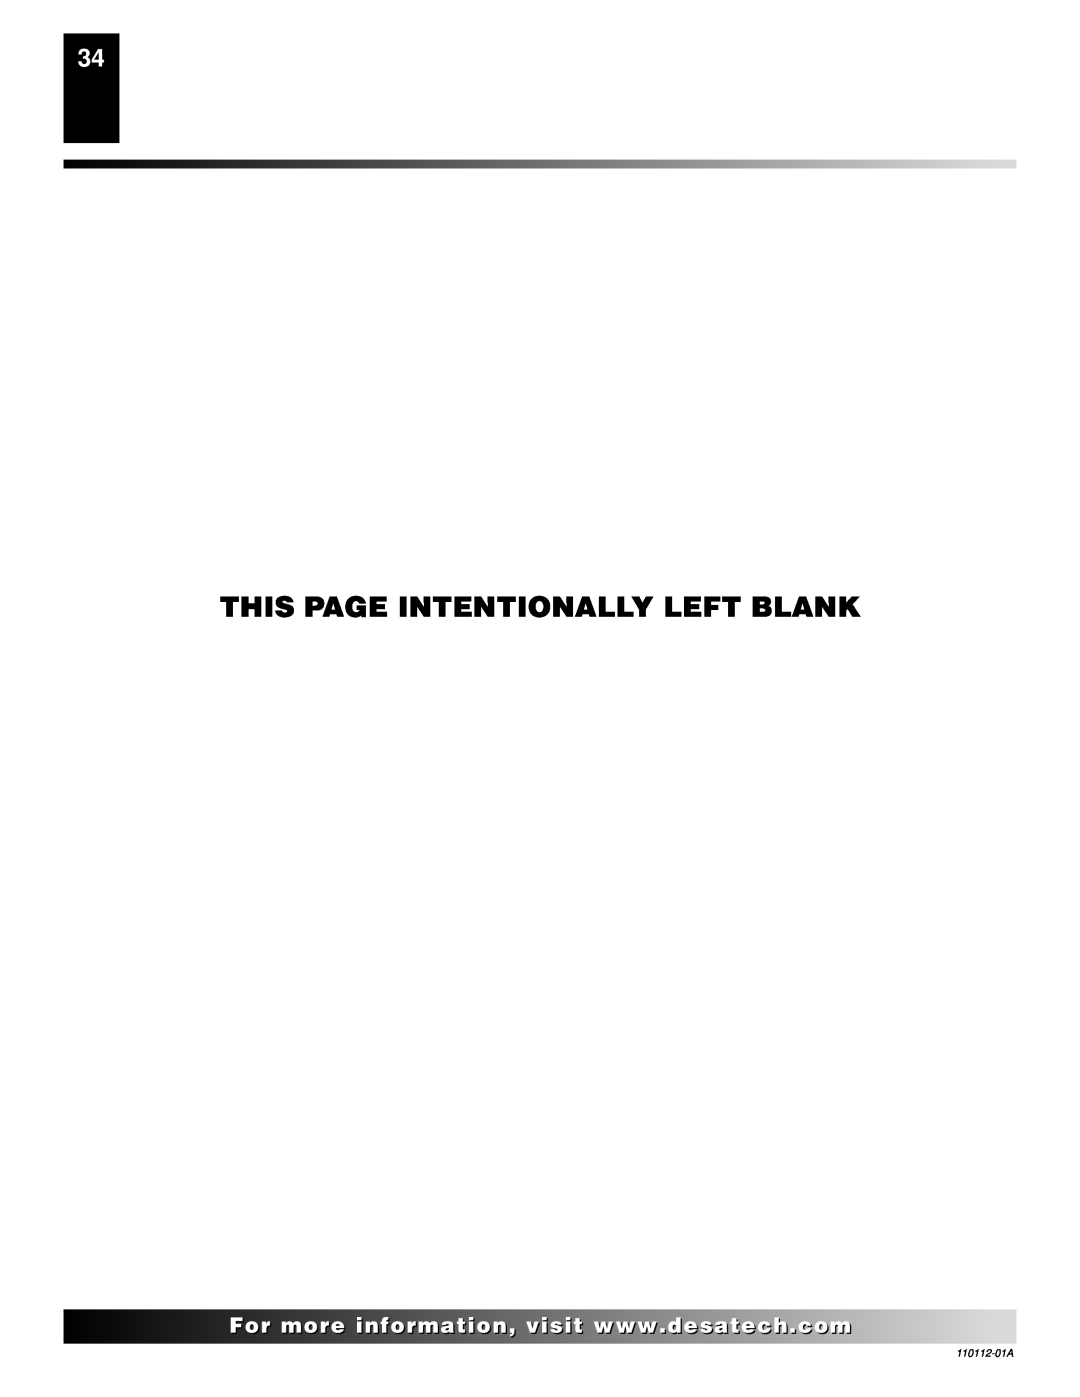 Desa VTGF33NRA installation manual This Page Intentionally Left Blank, For..com, 110112-01A 